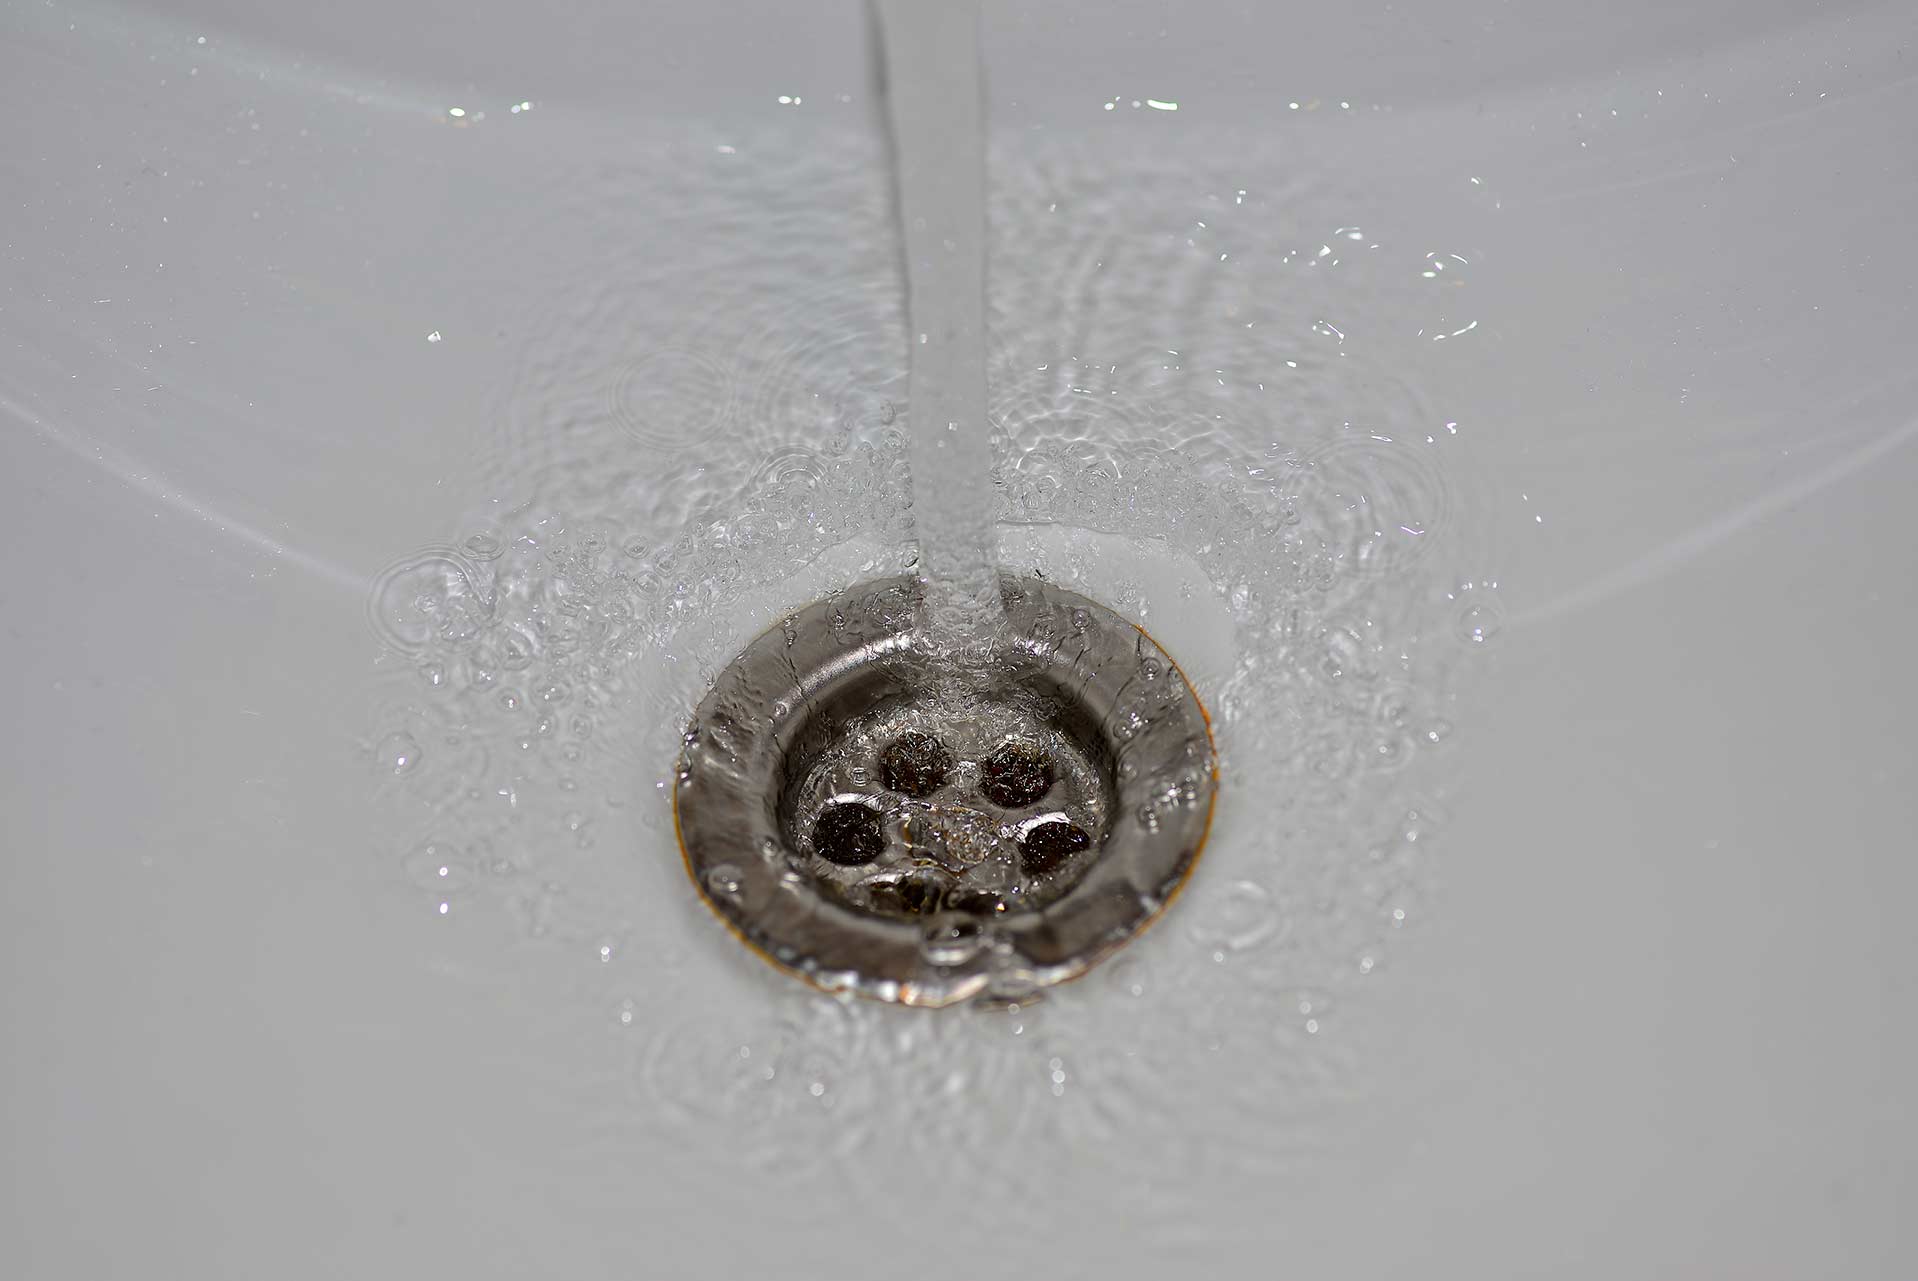 A2B Drains provides services to unblock blocked sinks and drains for properties in Wigan.